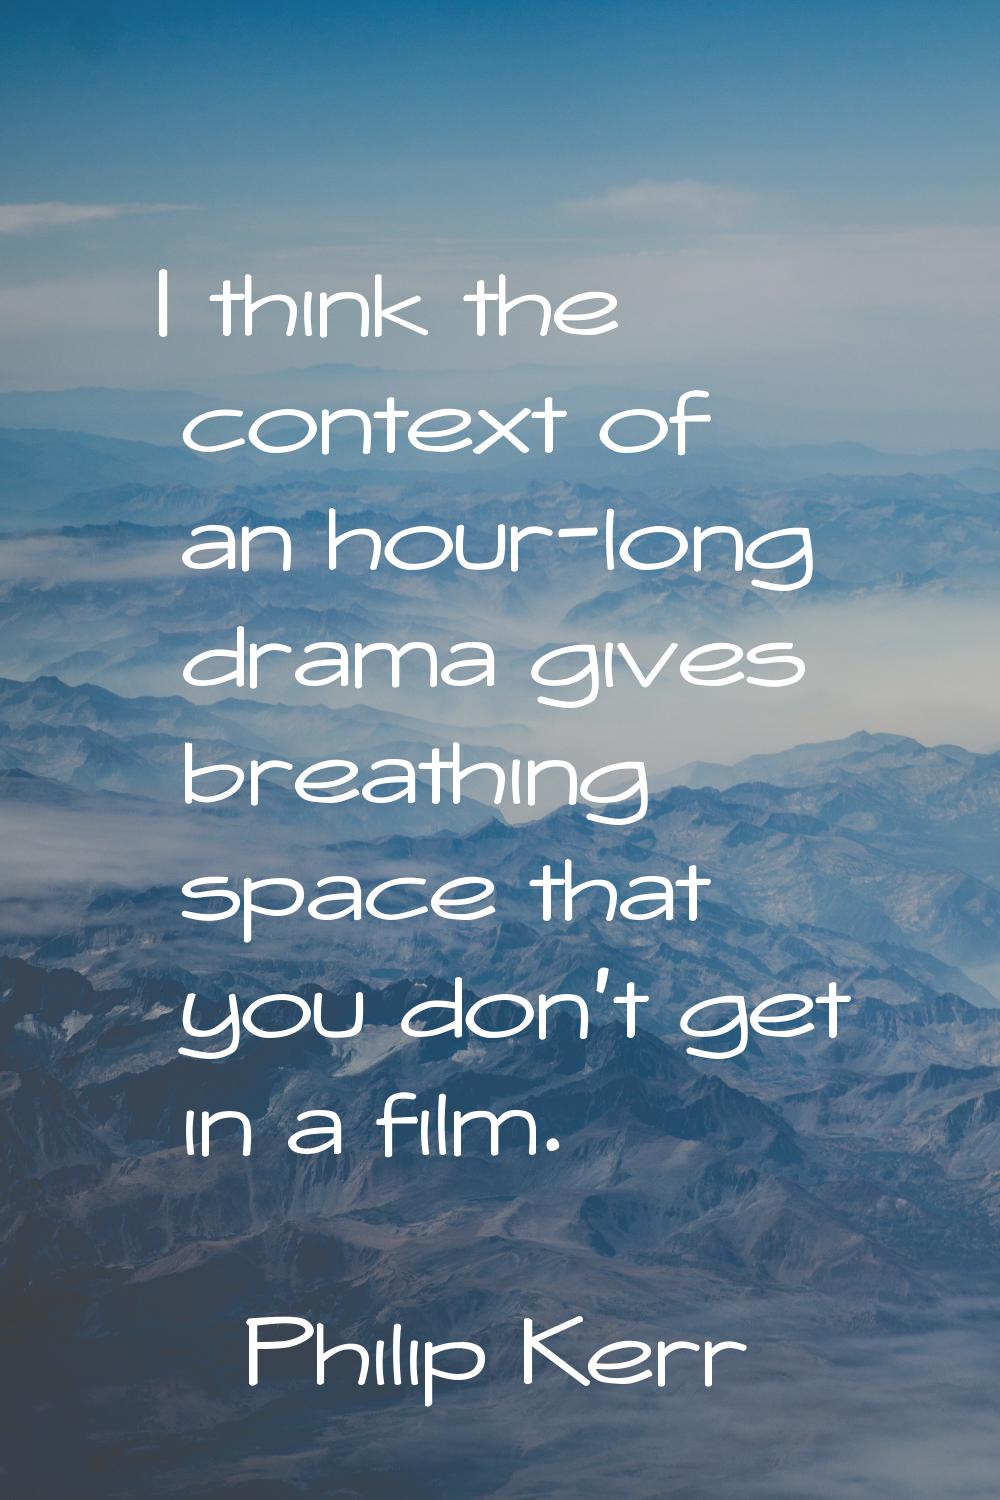 I think the context of an hour-long drama gives breathing space that you don't get in a film.